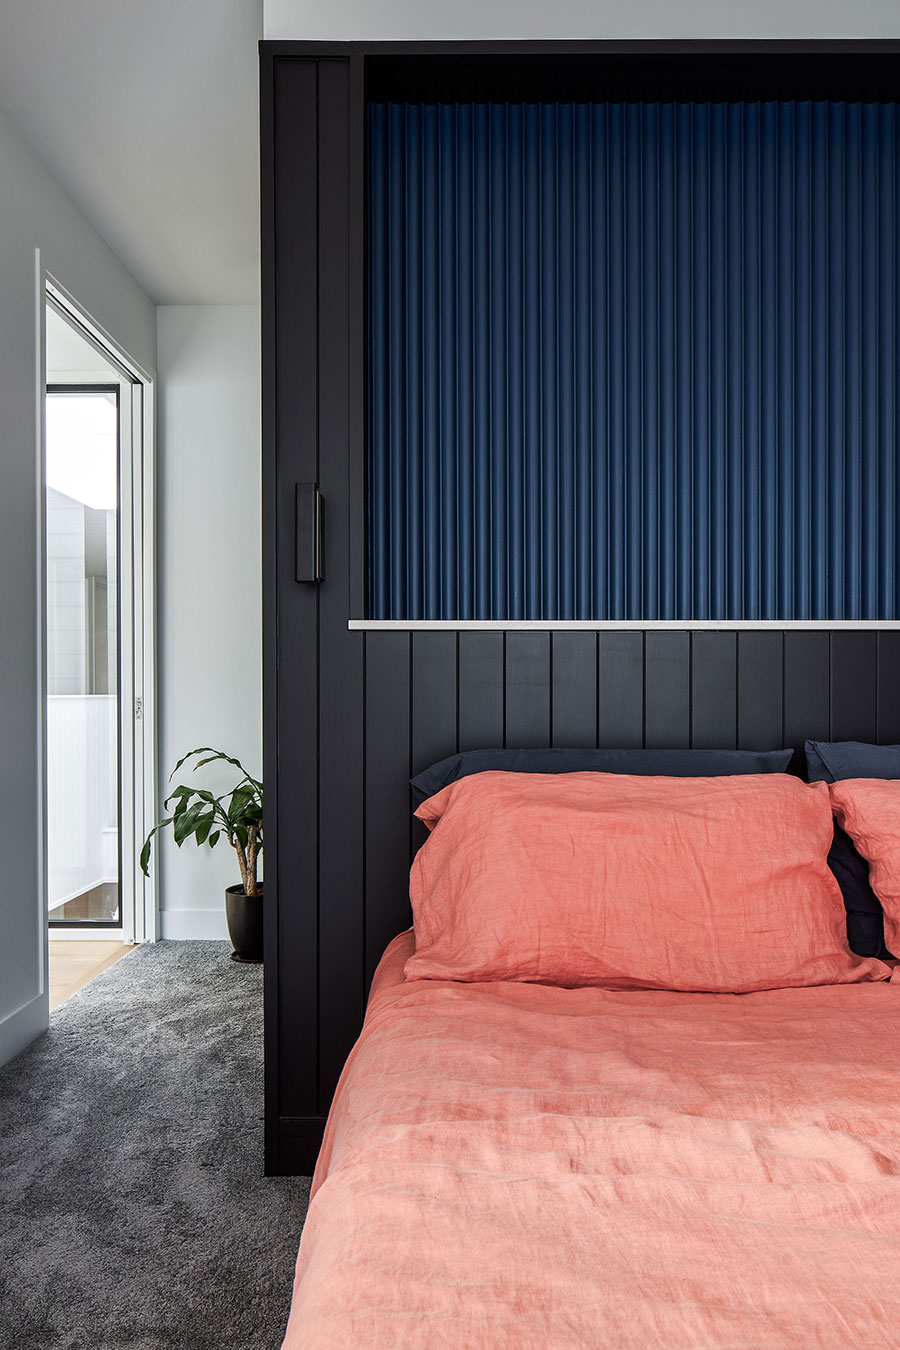 SMITH Architects modern family home coloured paneling bedhead